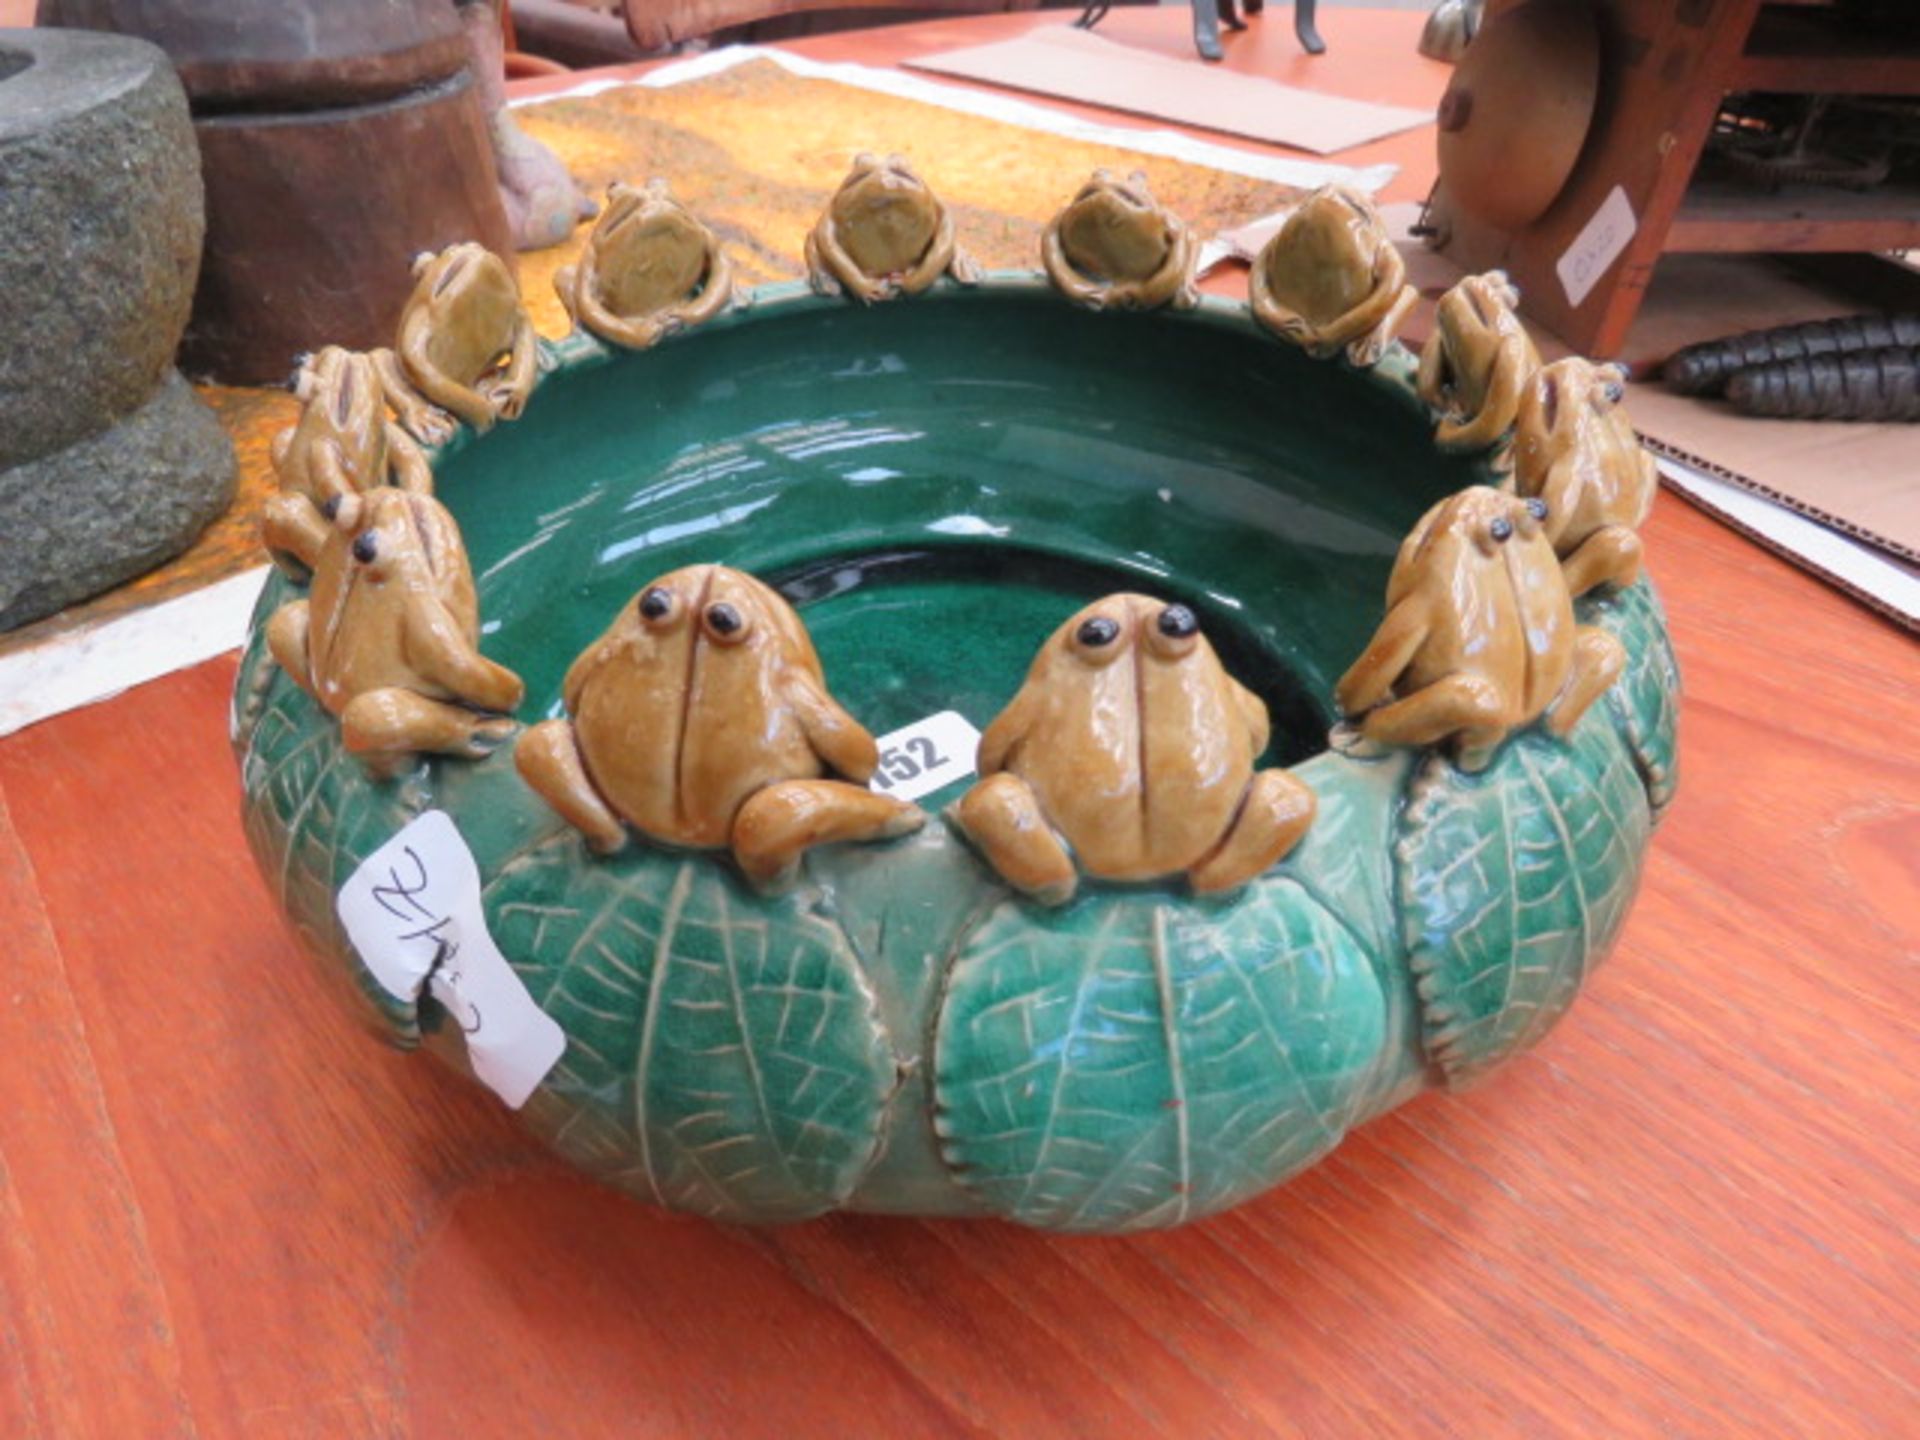 Frog and lily pad patterned bowl